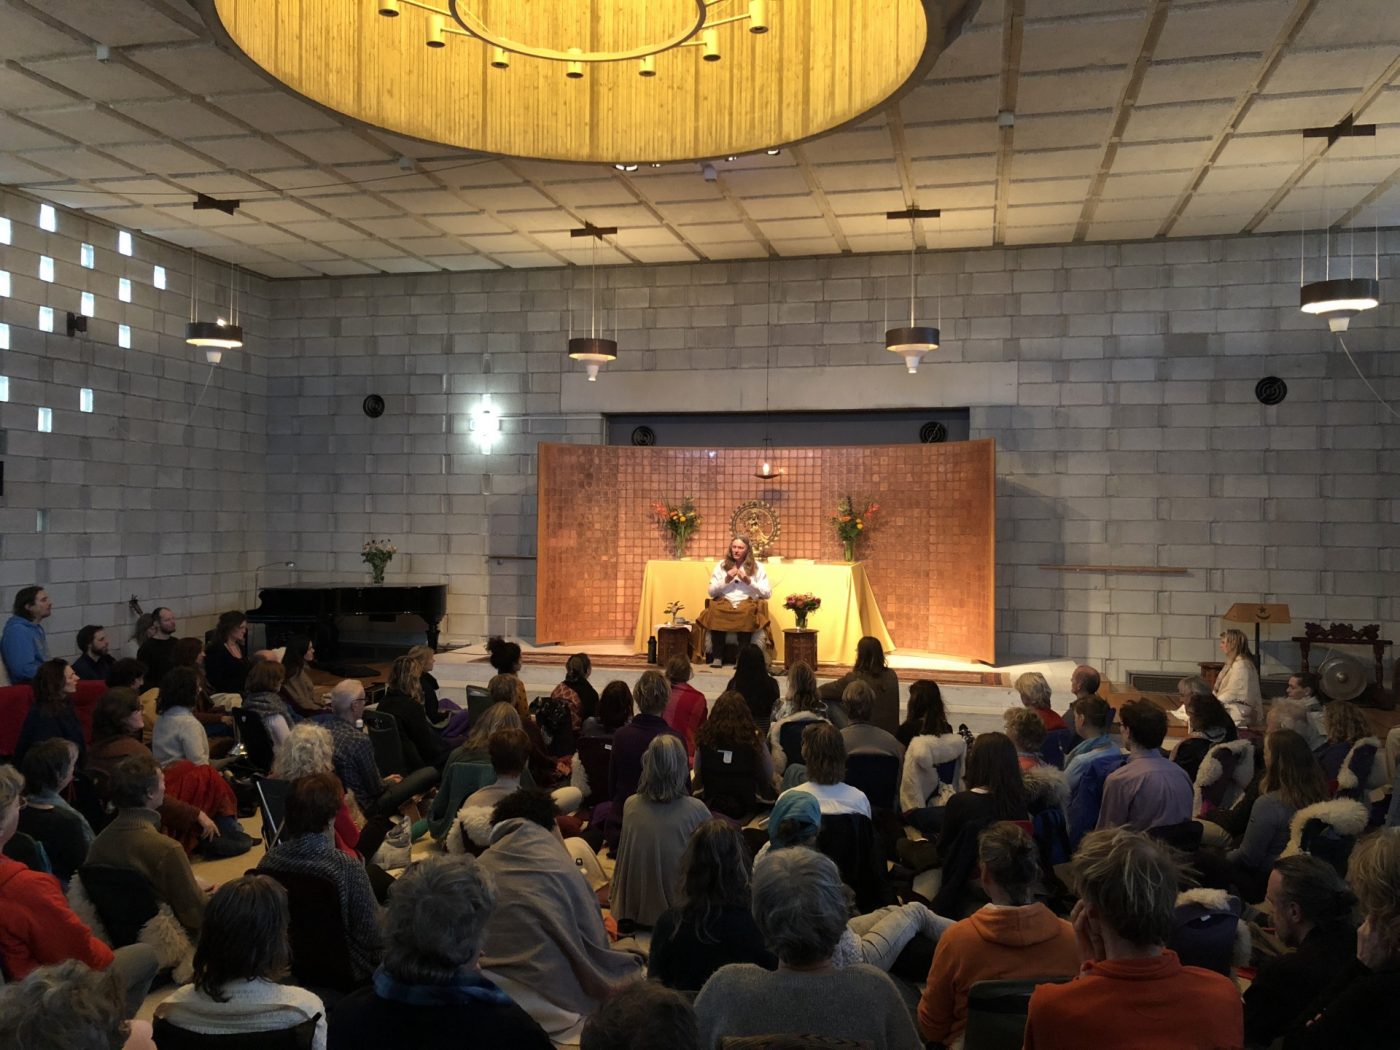 Satsang (NL) live and online - CANCELLED!